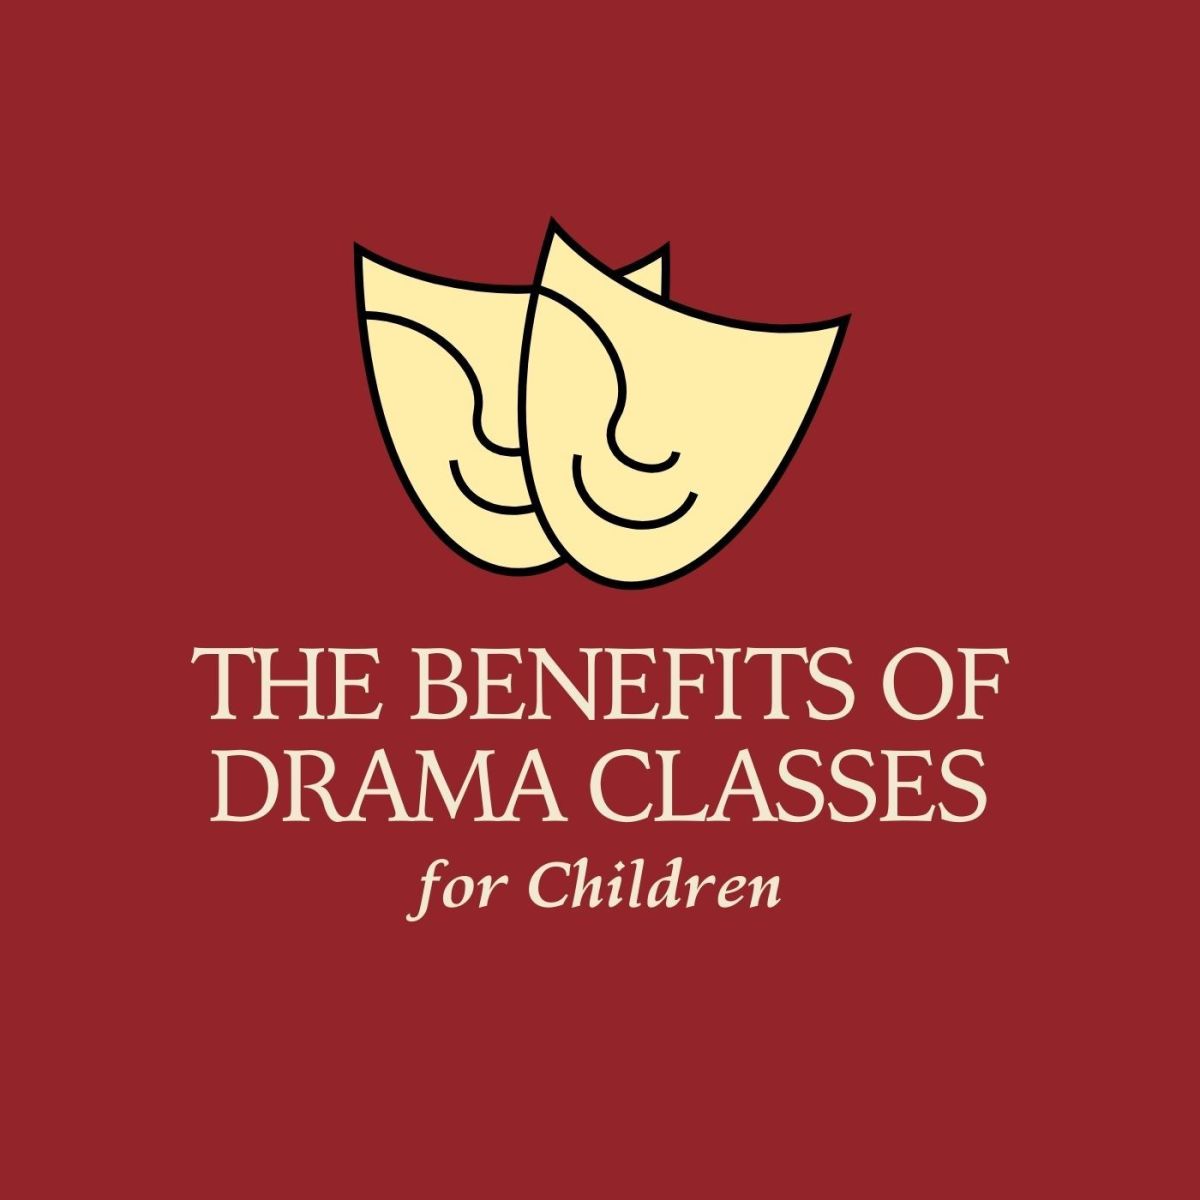 The Benefits of Drama Classes for Children